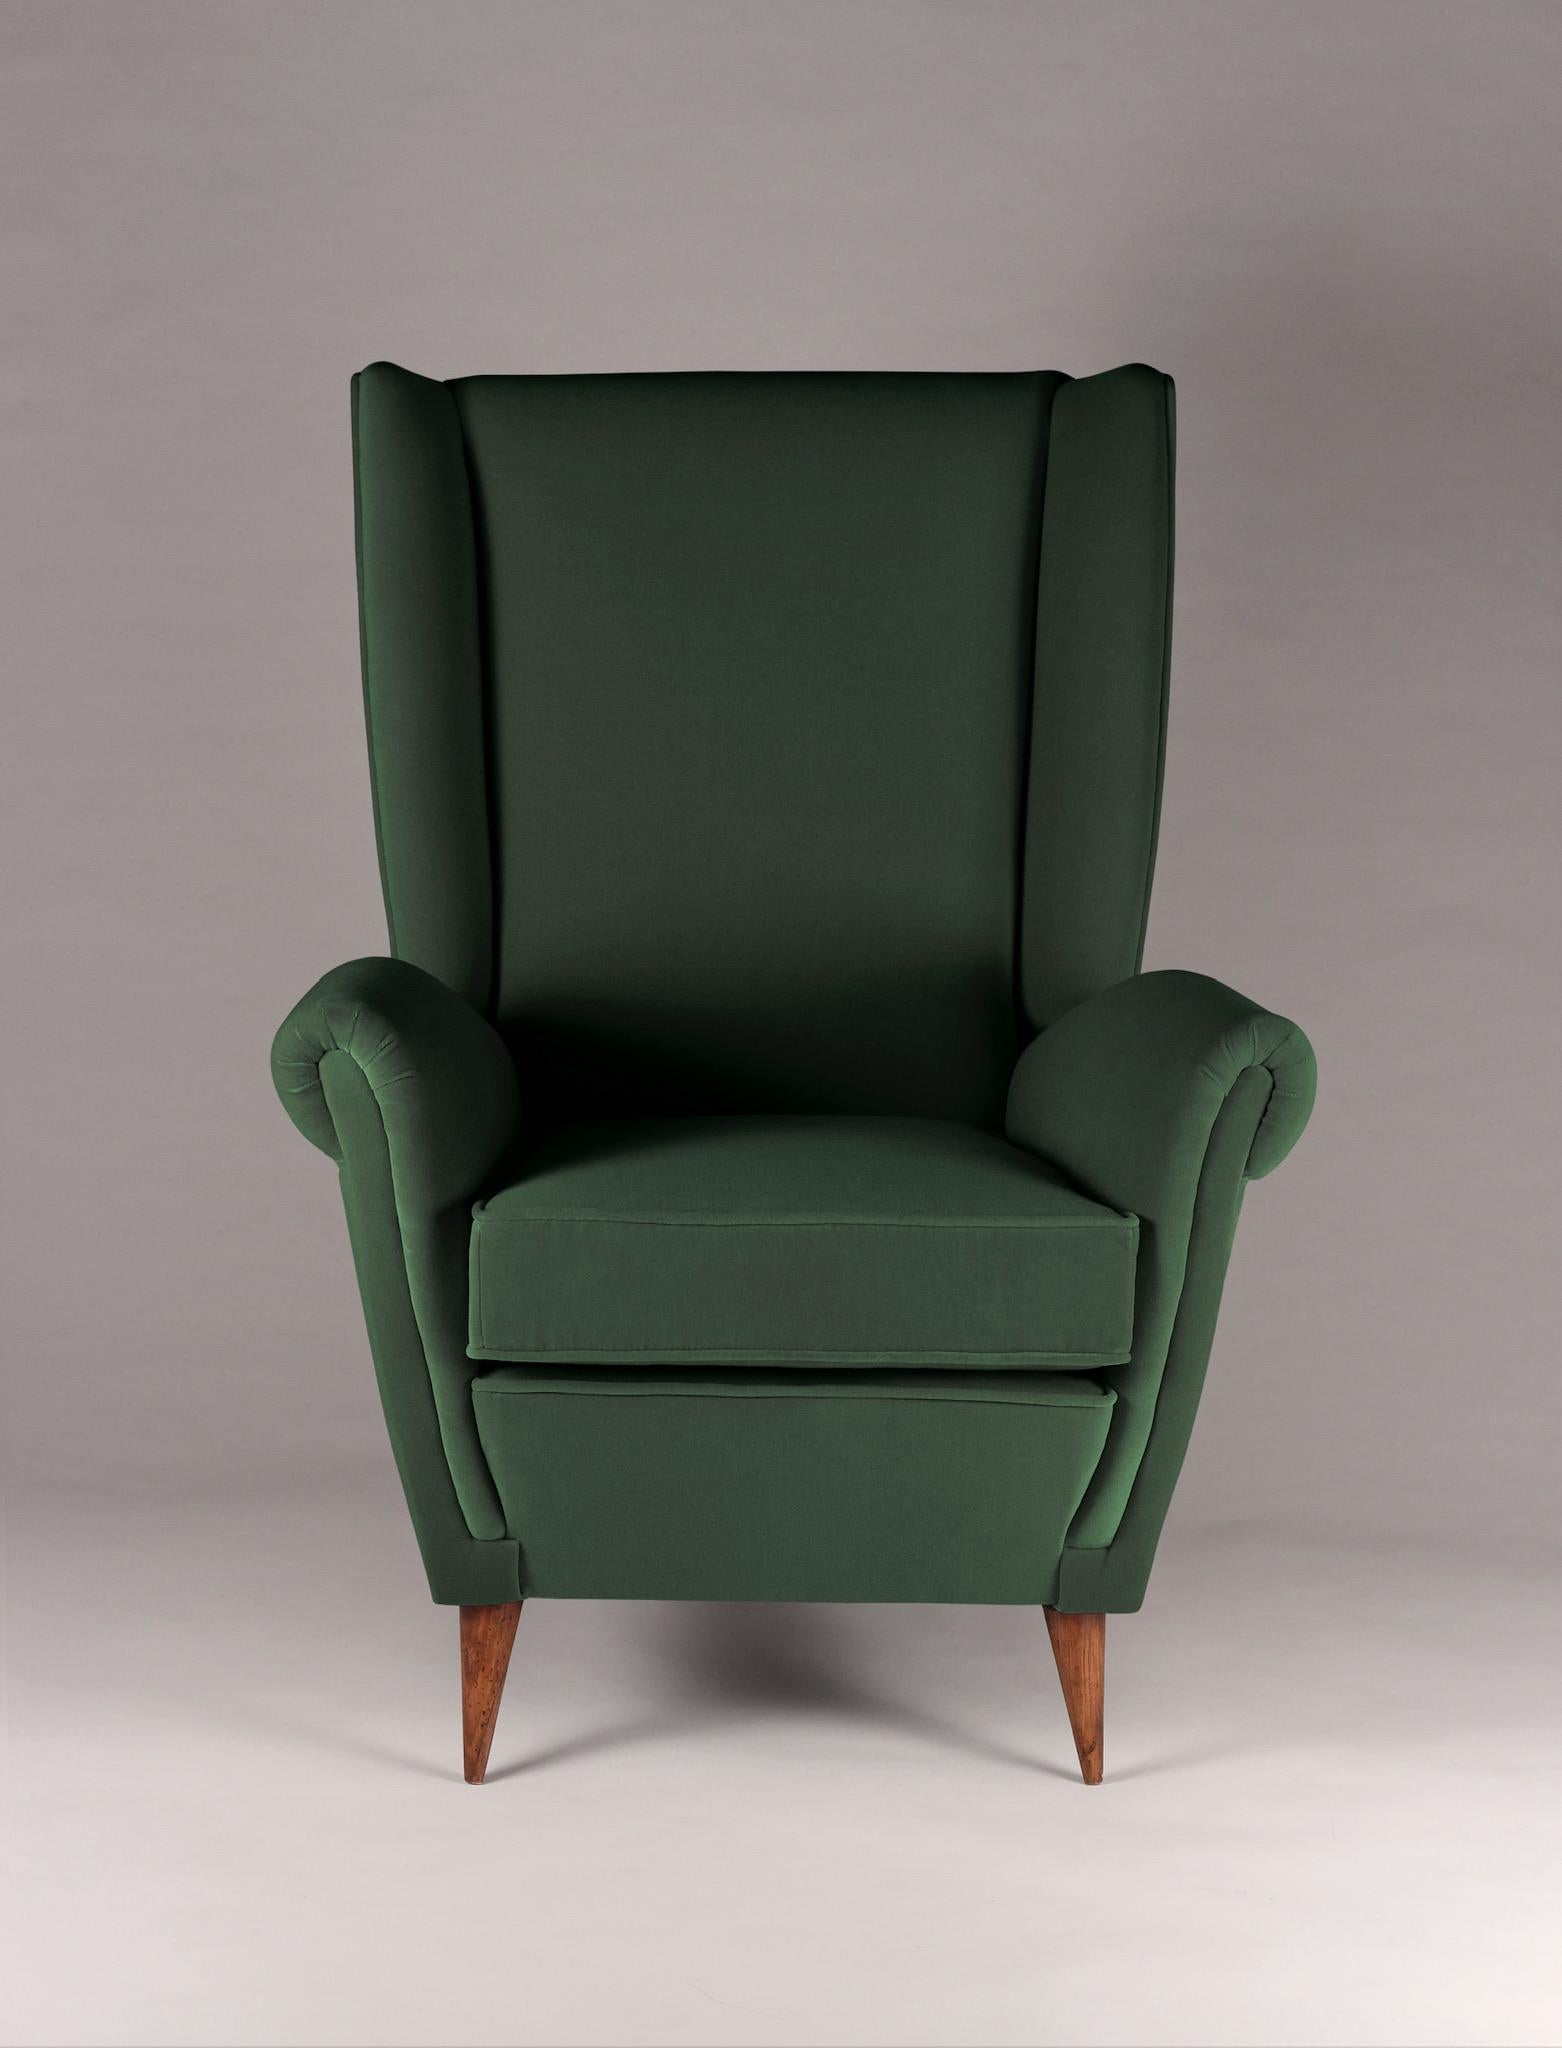 The high back lounge chair ‘Marcello’ was inspired by stylish Italian design from the 1950s and is now created by English craftsman for the 21st century. We developed a lounge chair with the option of producing any number to your fabric